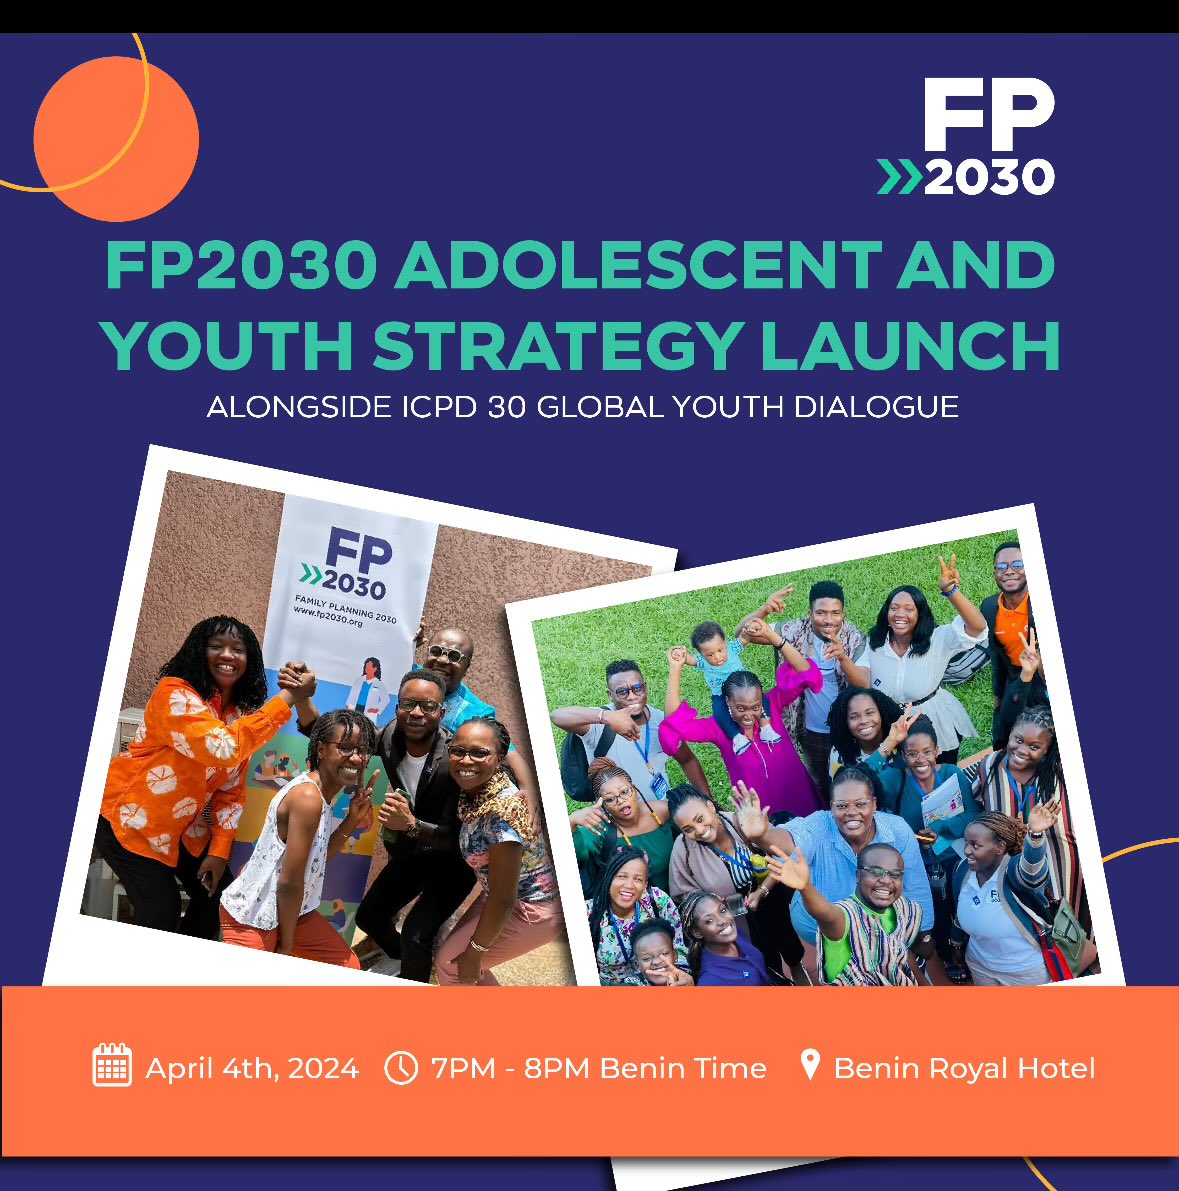 Yesterday we launched our AY strategy in Cotonou in Benin-because we believe that the future is young; and that human centered development includes one’s ability to decide about their reproductive health -now young people; it’s time to work! @FP2030Global @UNFPA @Monica_Kerrigan